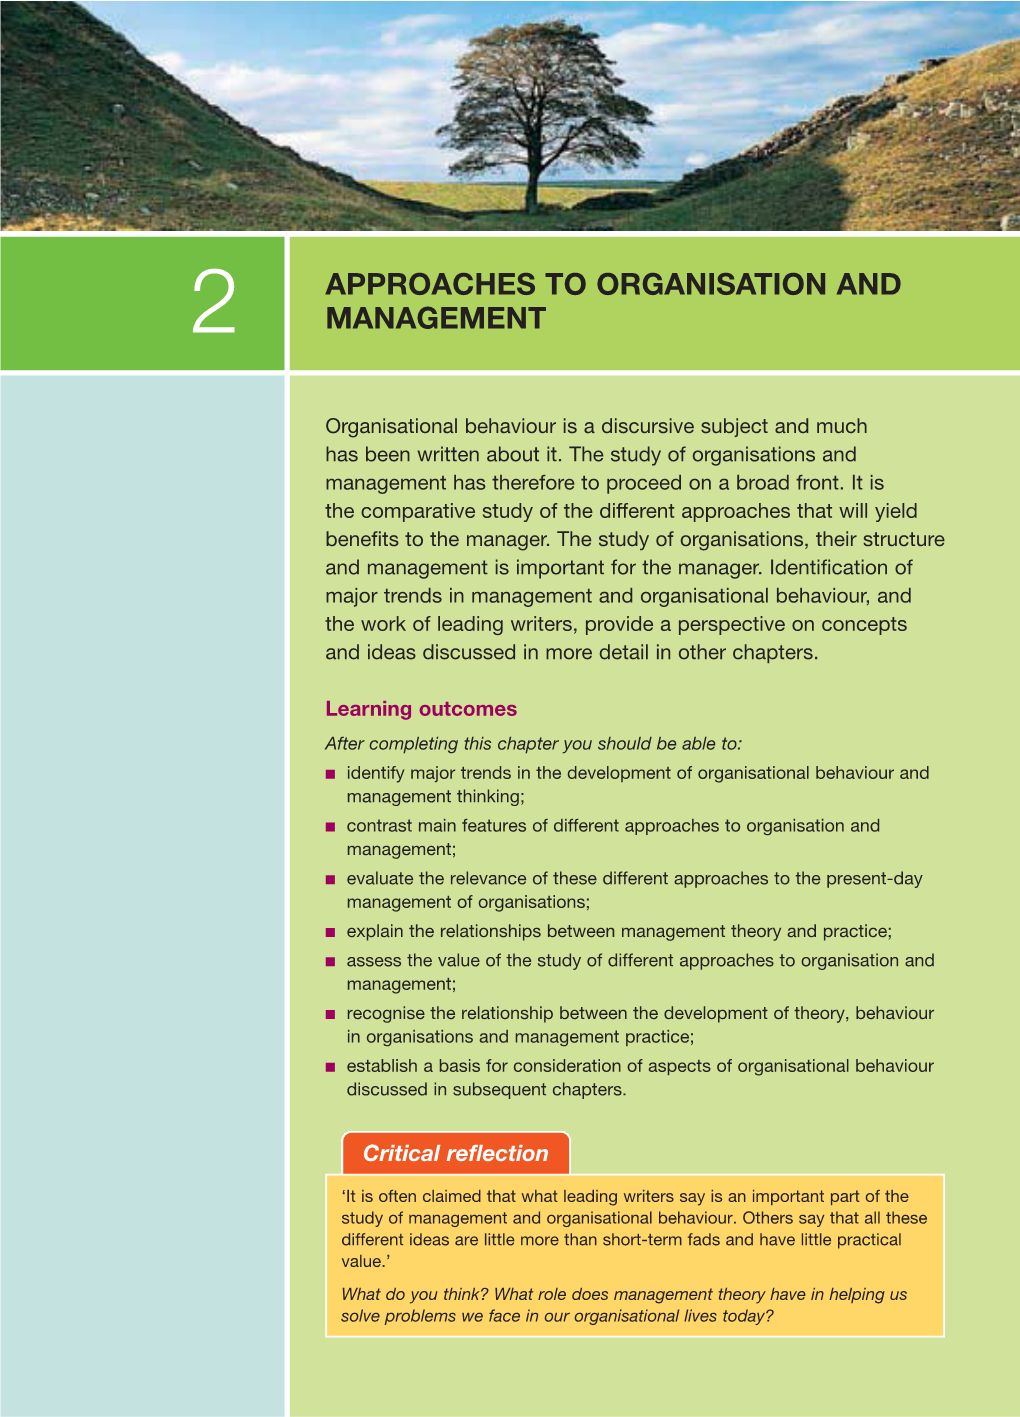 Approaches to Organisation and Management